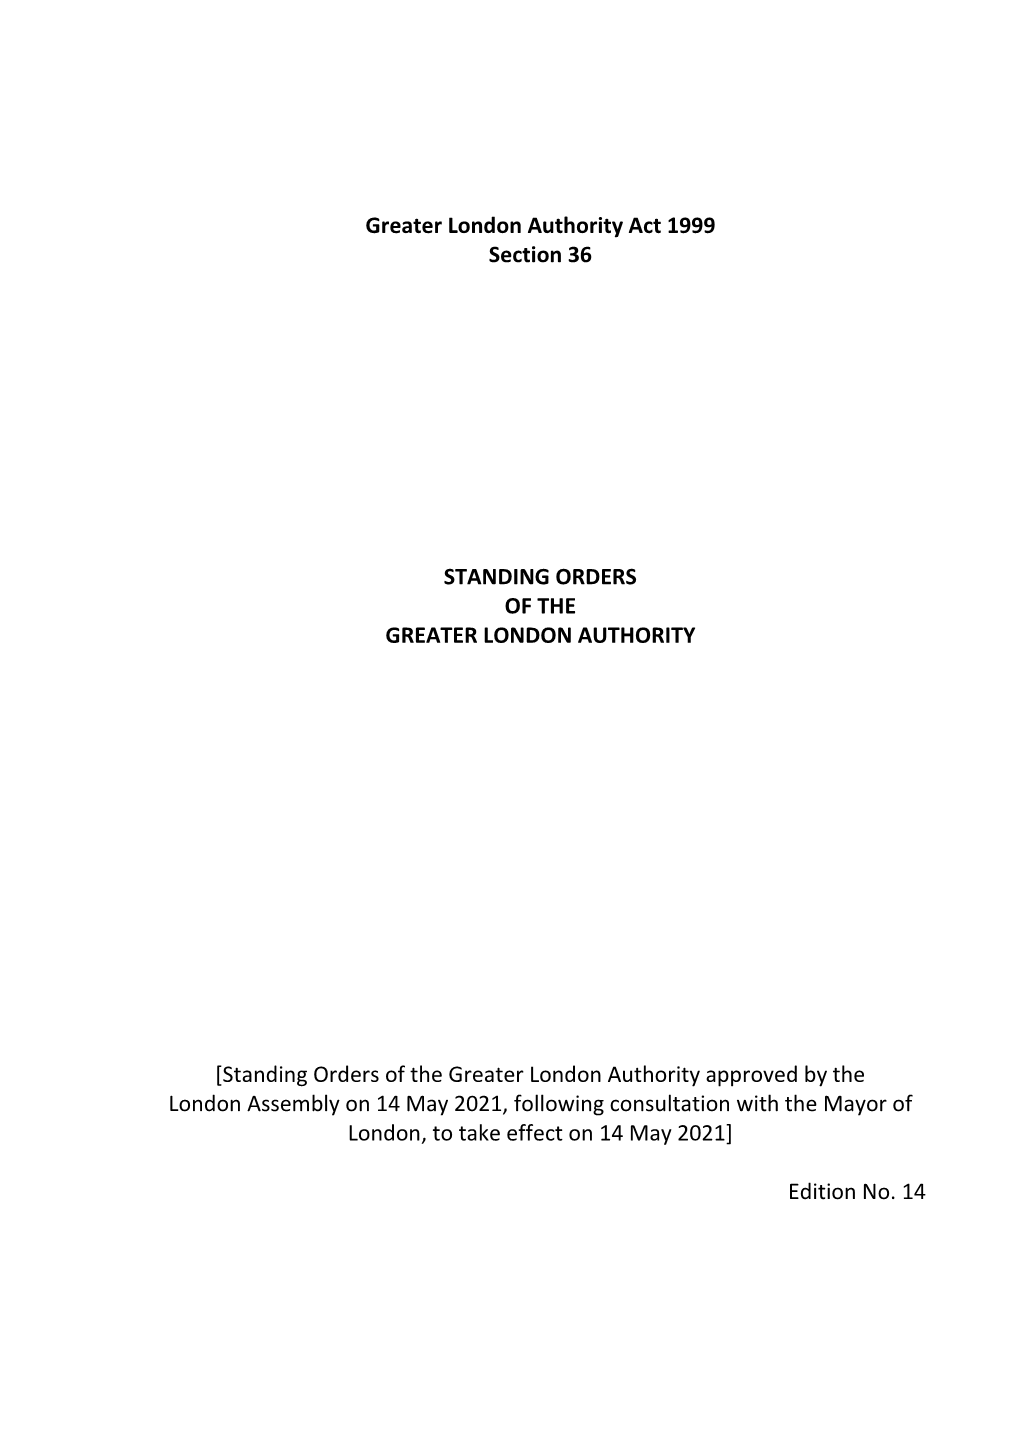 Standing Orders of the Greater London Authority